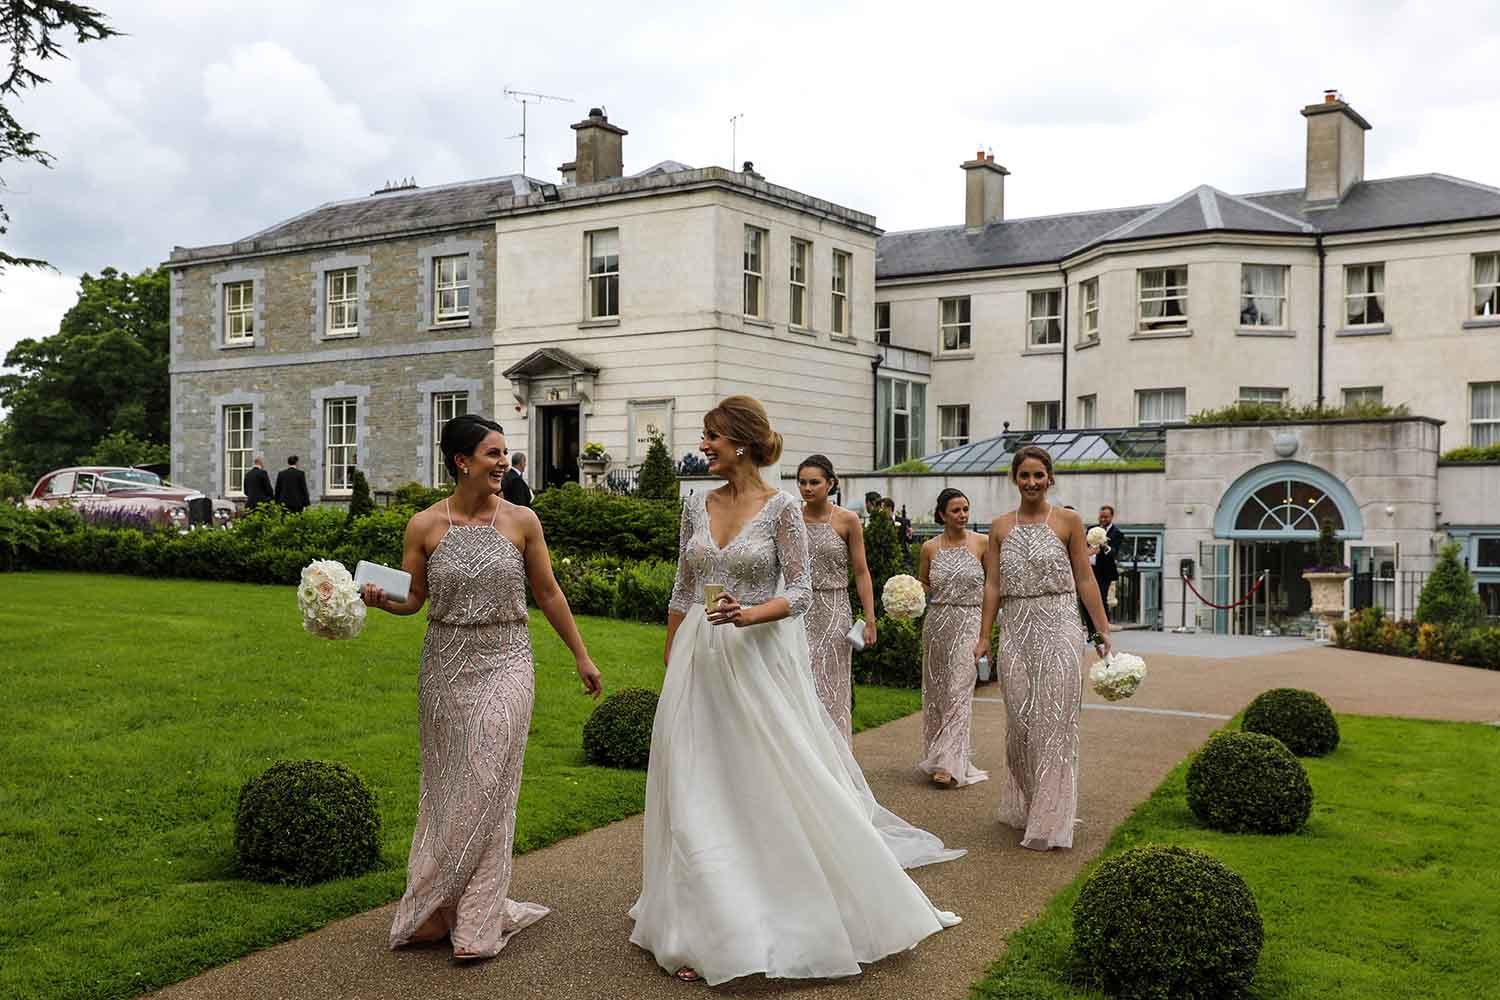 Bridal party strolling through the grounds of Tankardstown House